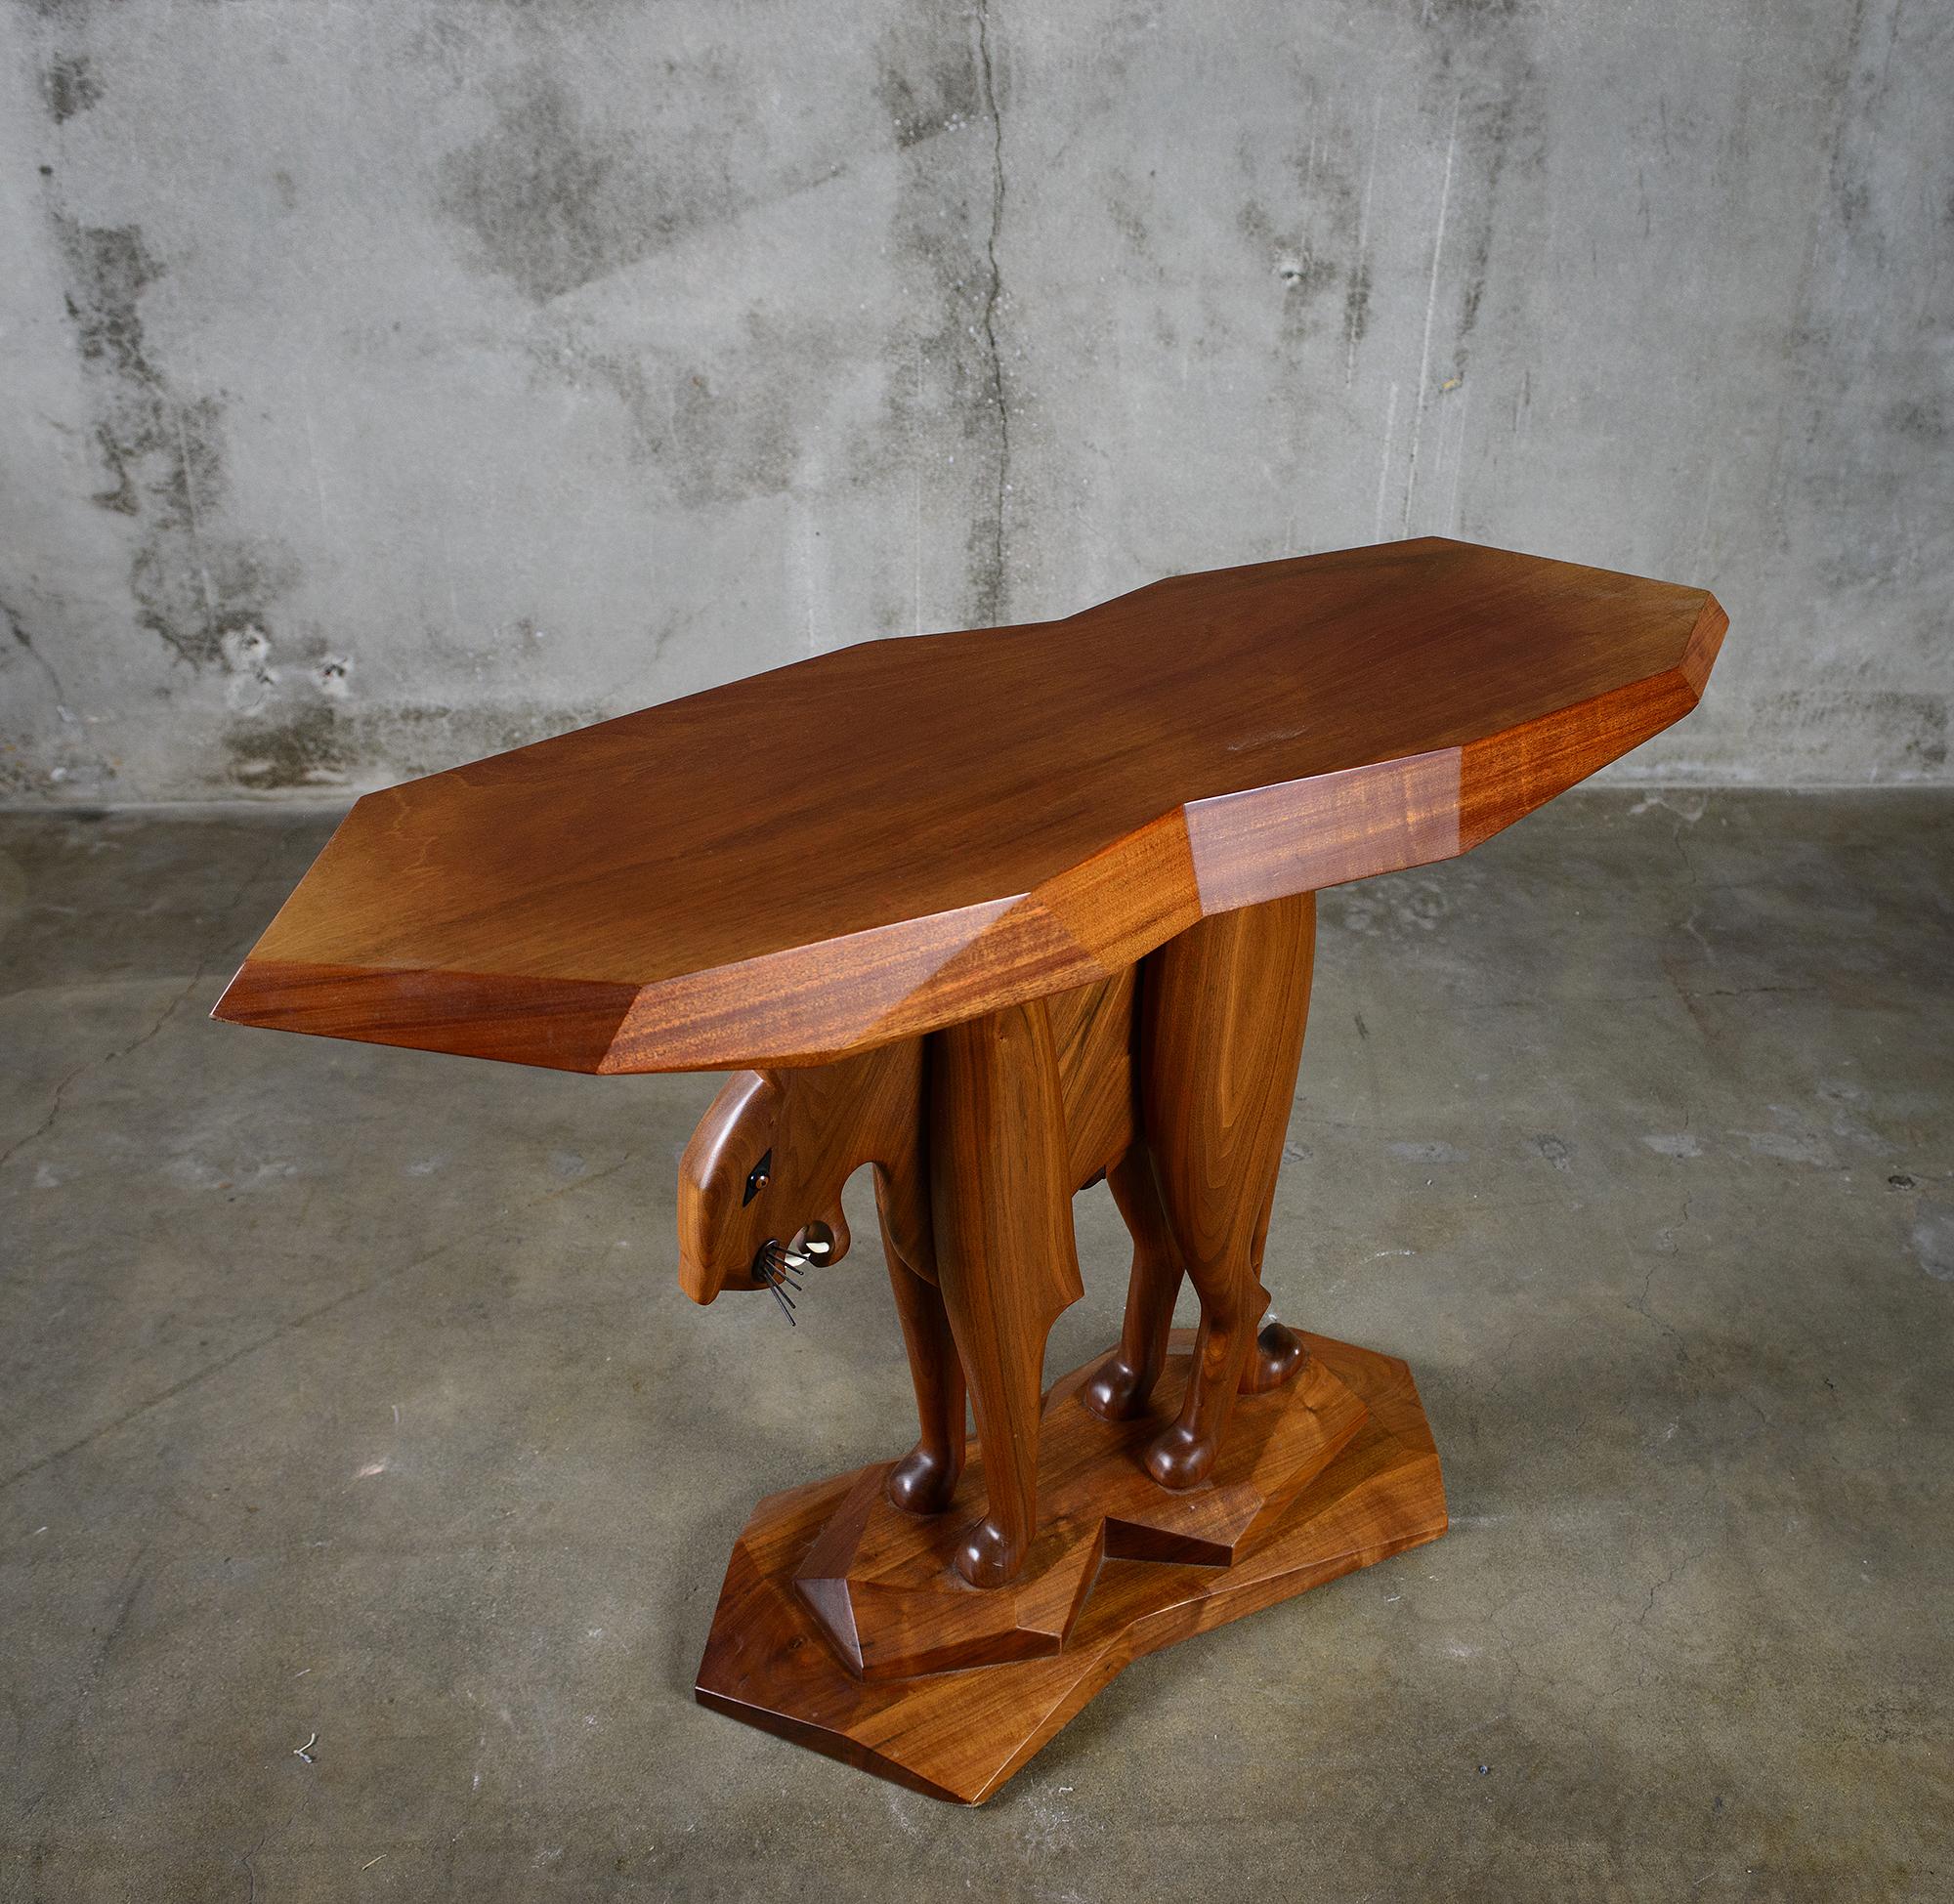 Robert Whitley Leopard Figure Table In Excellent Condition For Sale In Los Angeles, CA